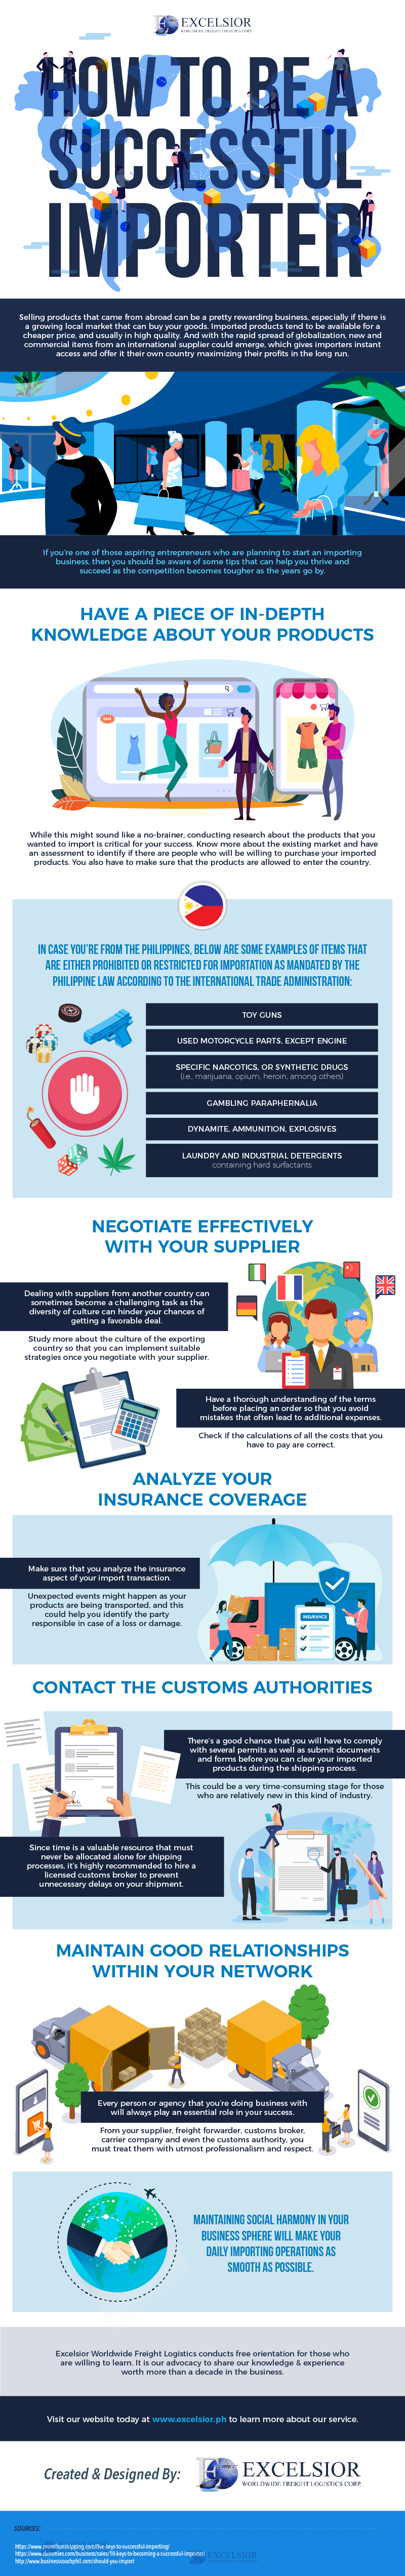 How to Be a Successful Importer!  (Infographic)